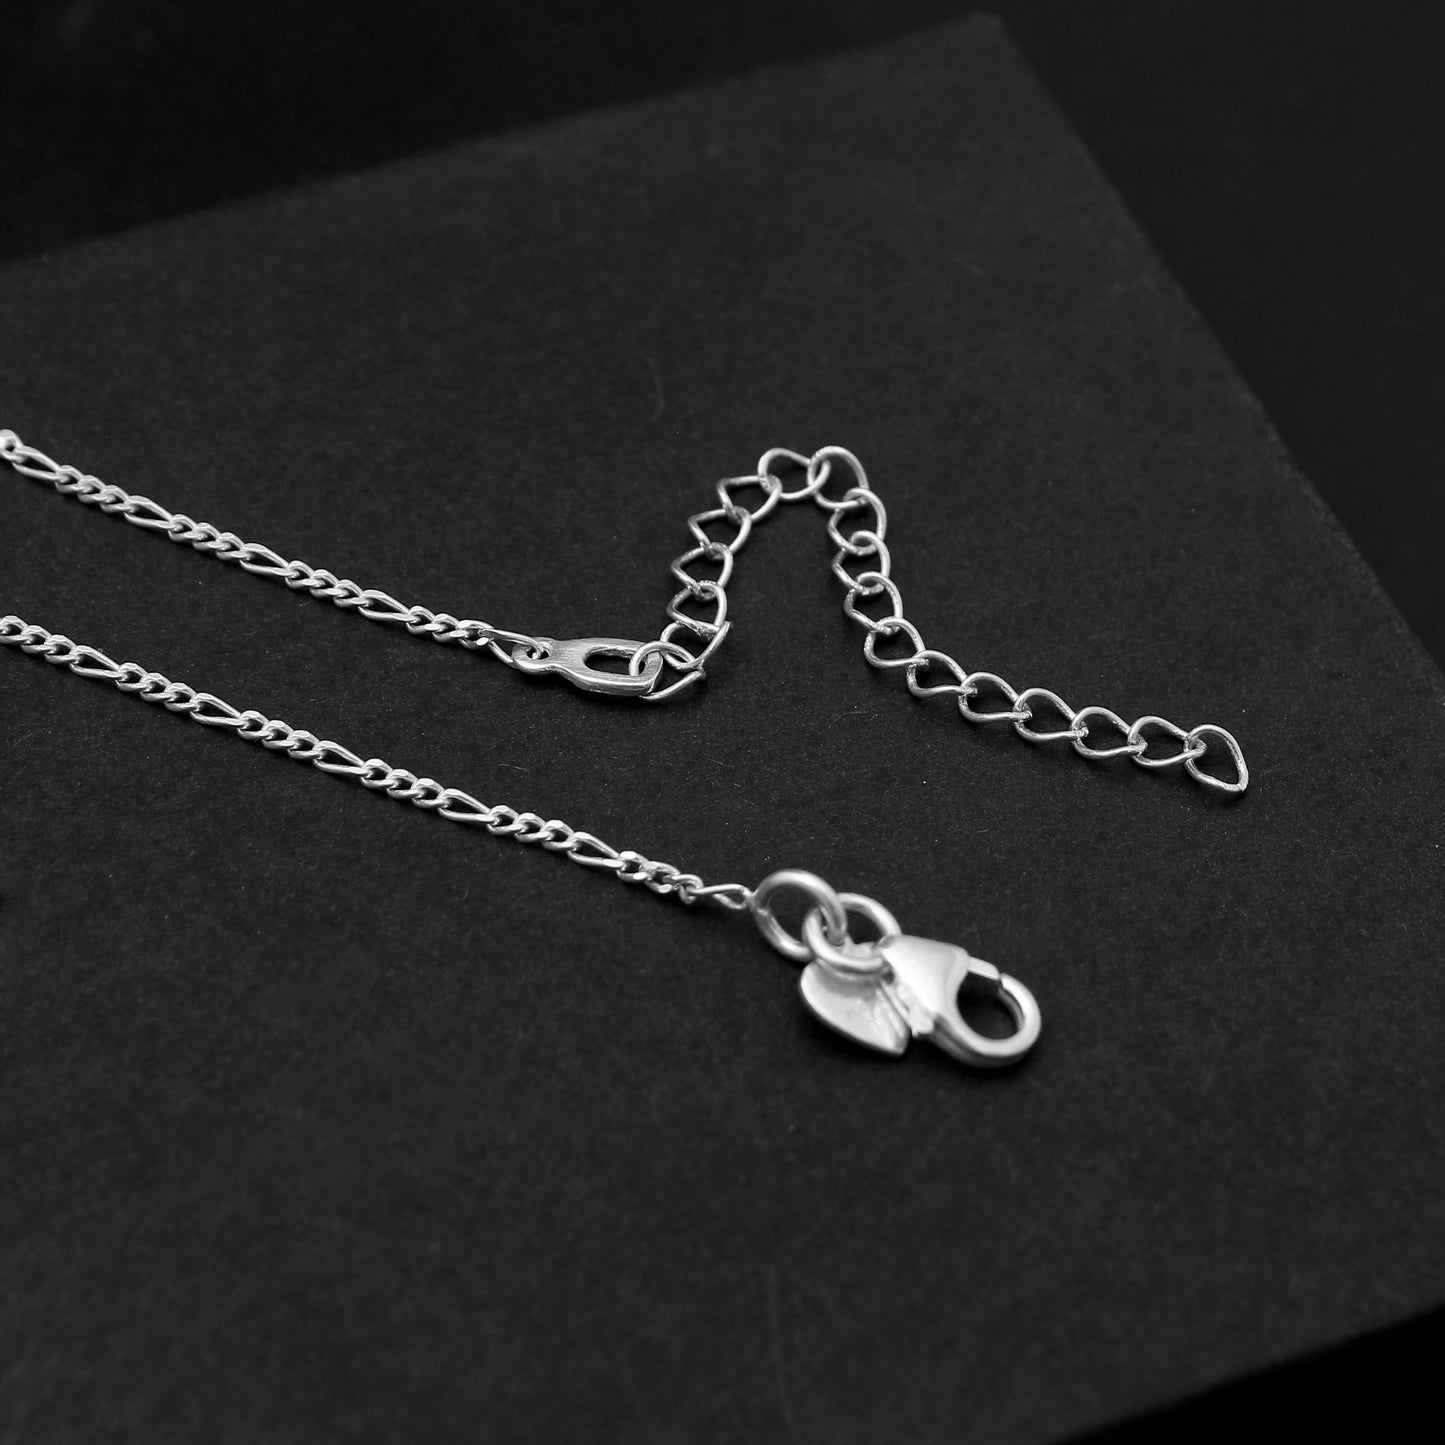 Astrology Zodiac Symbol Necklace, PISCES Silver Necklace, Gift For Bestfriend GemsRush